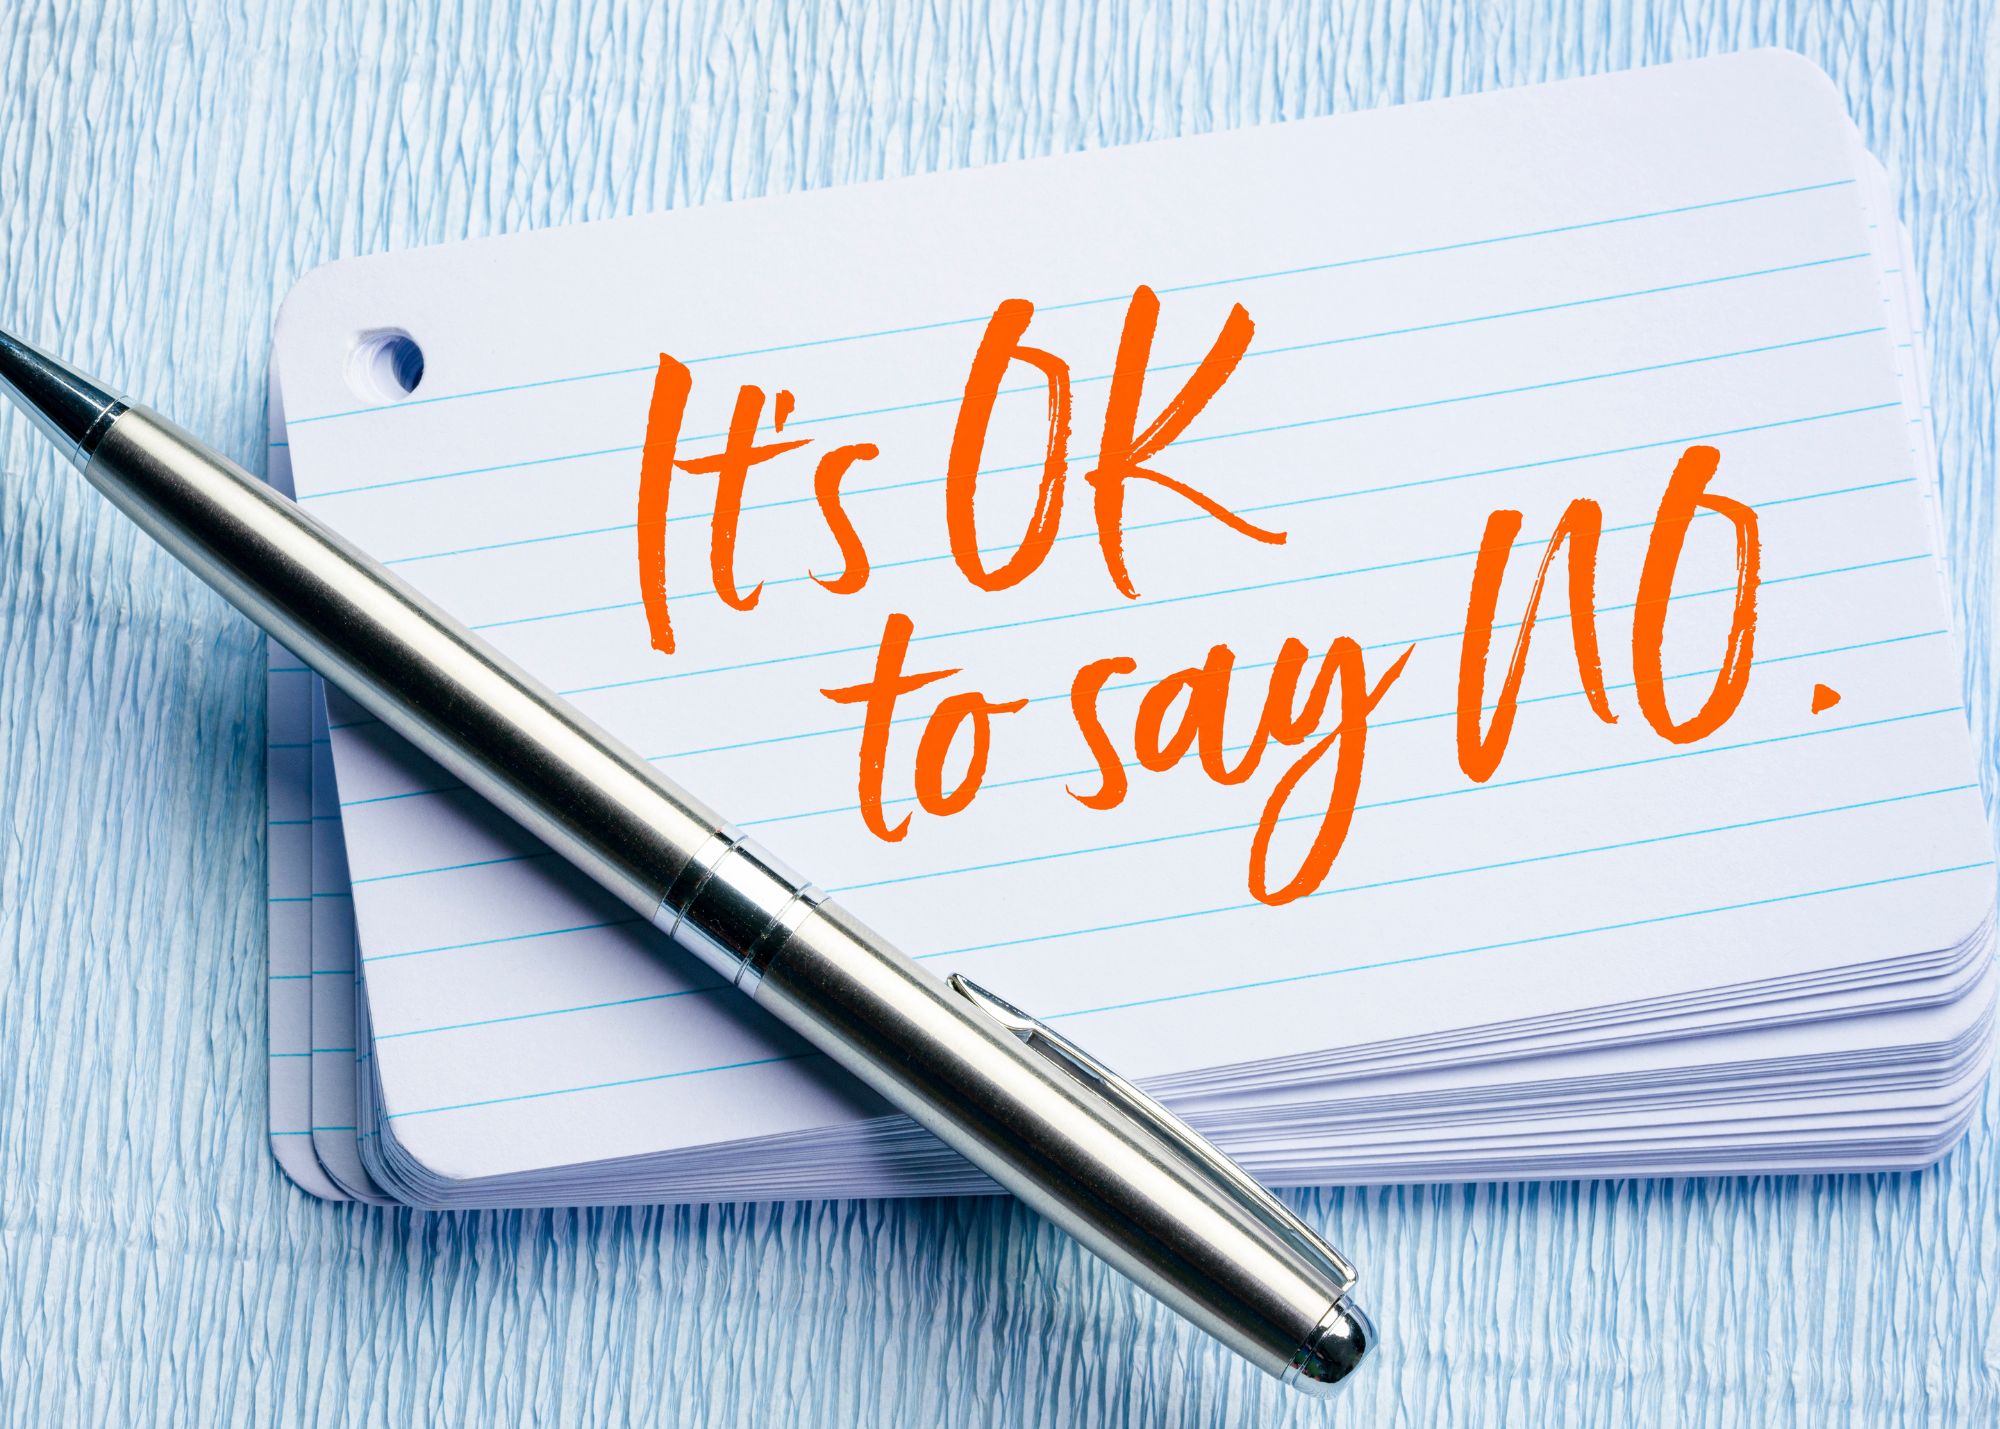 Tips for saying no effectively.